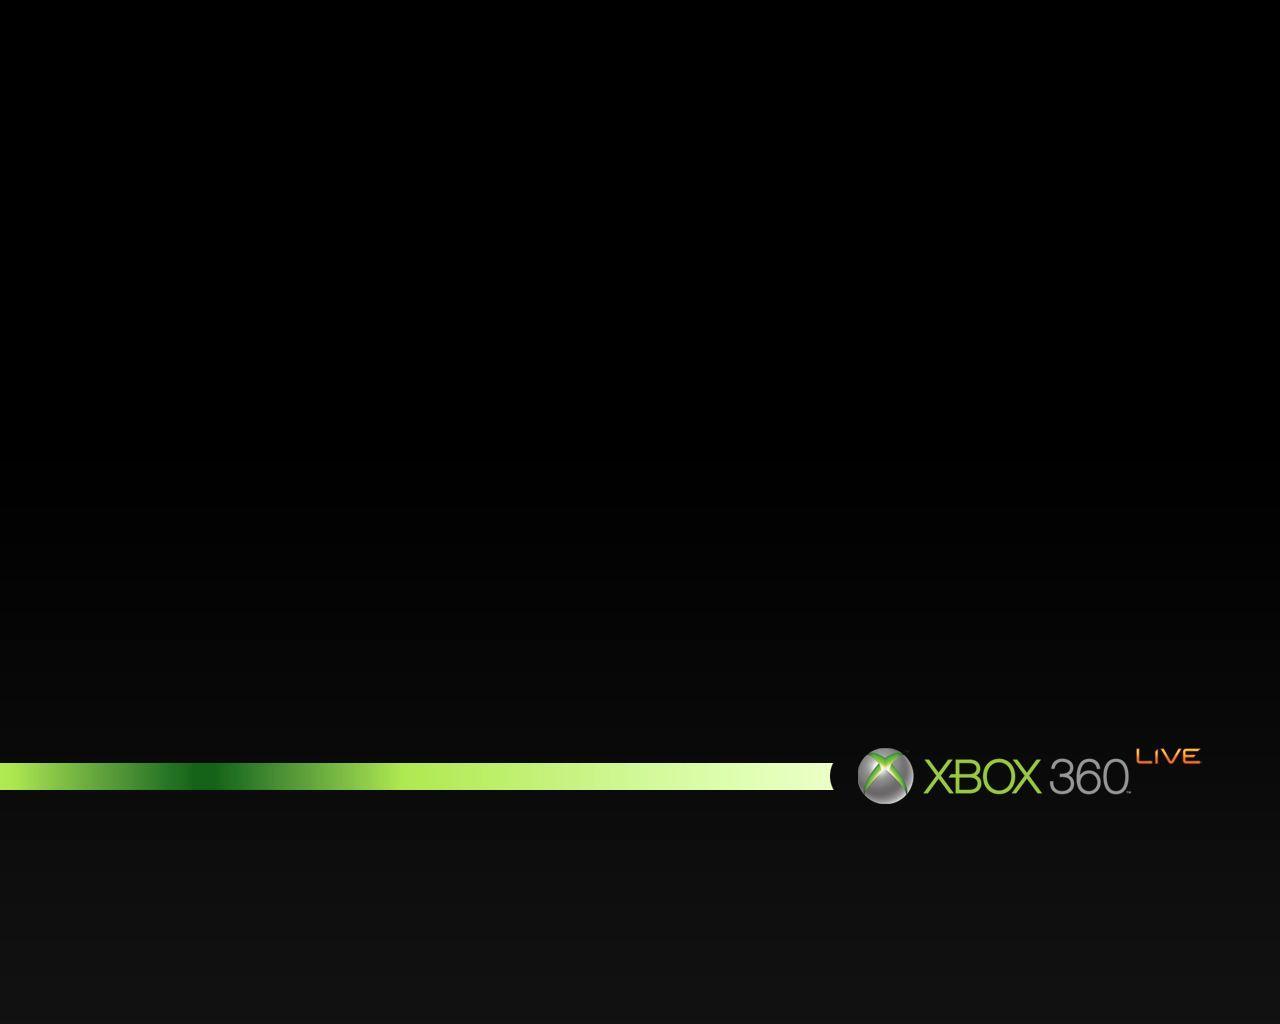 The Image of Xbox 360 1280x1024 HD Wallpaper